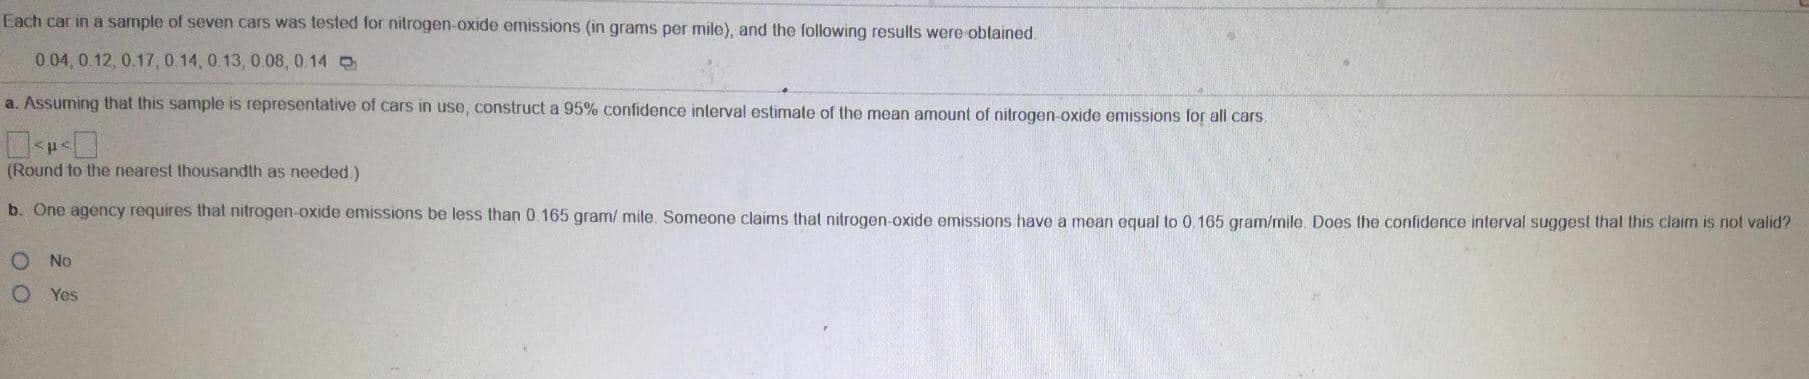 Each car in a sample of seven cars was tested for nitrogen-oxide emissions (in grams per mile), and the following results were oblained
0.04, 0.12, 0.17, 0.14, 0.13, 0.08, 0.14
a. Assuming that this sample is representative of cars in use, construct a 95 % confidence interval estimate of the mean amount of nitrogen-oxide emissions for all cars
(Round to the nearest thousandth as needed.)
b. One agency requires that nitrogen-oxide emissions be less than 0.165 gram/ mile. Someone claims that nitrogen-oxide emissions have a mean equal to 0.165 gram/mile. Does the confidence interval suggest that this claim is not valid?
No
Yes
O O
